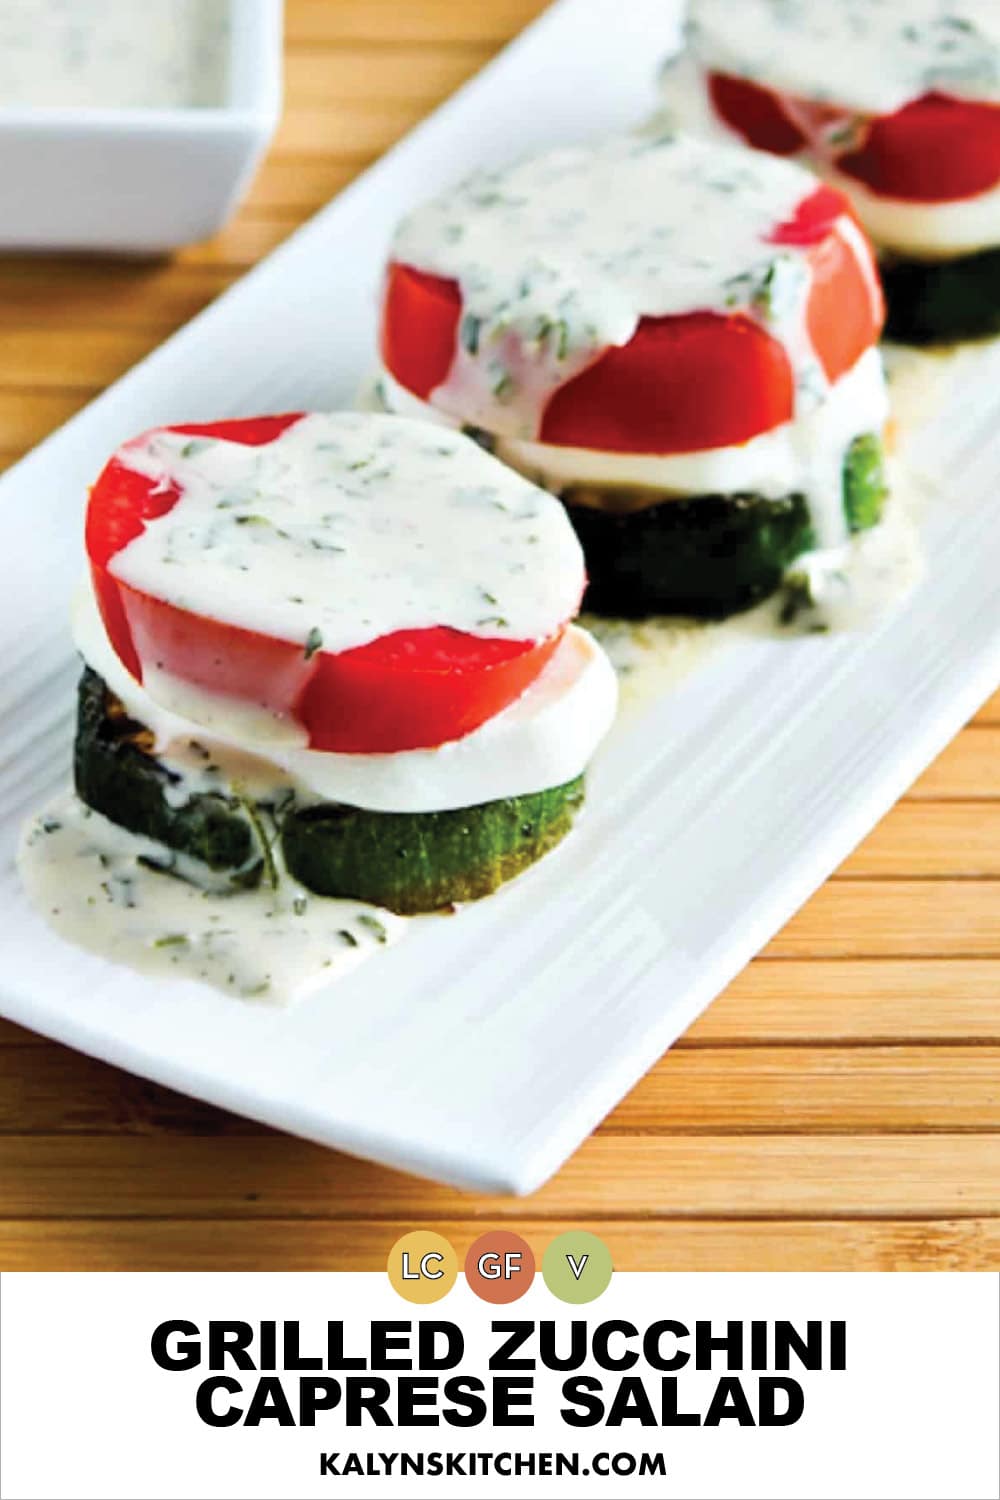 Pinterest image of caprese salad with grilled zucchini